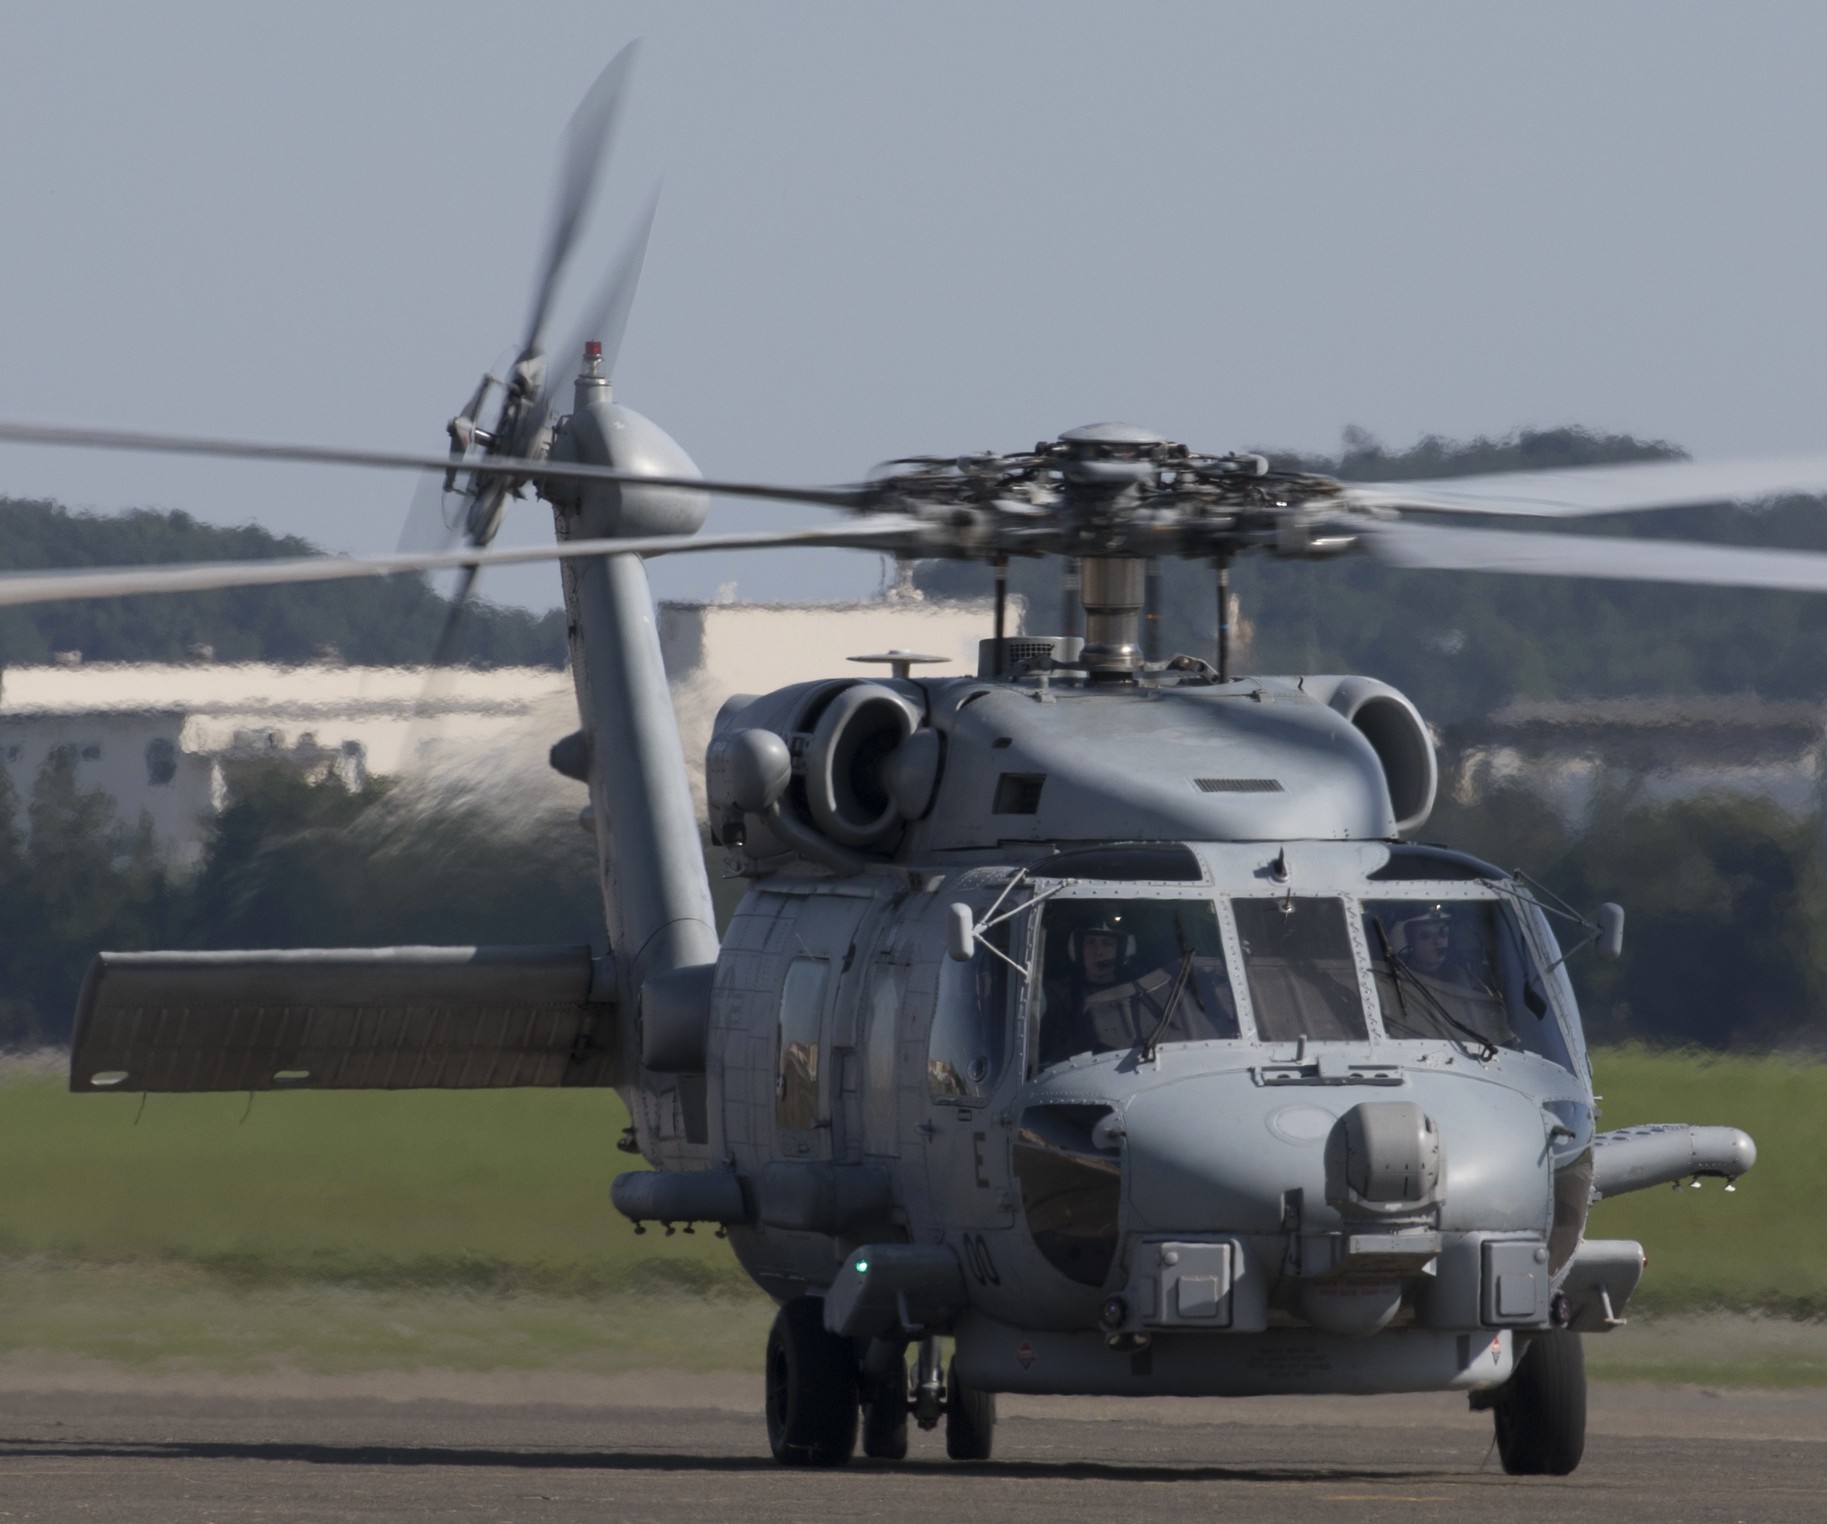 hsm-51 warlords helicopter maritime strike squadron mh-60r seahawk navy 2017 37 yokota airbase japan